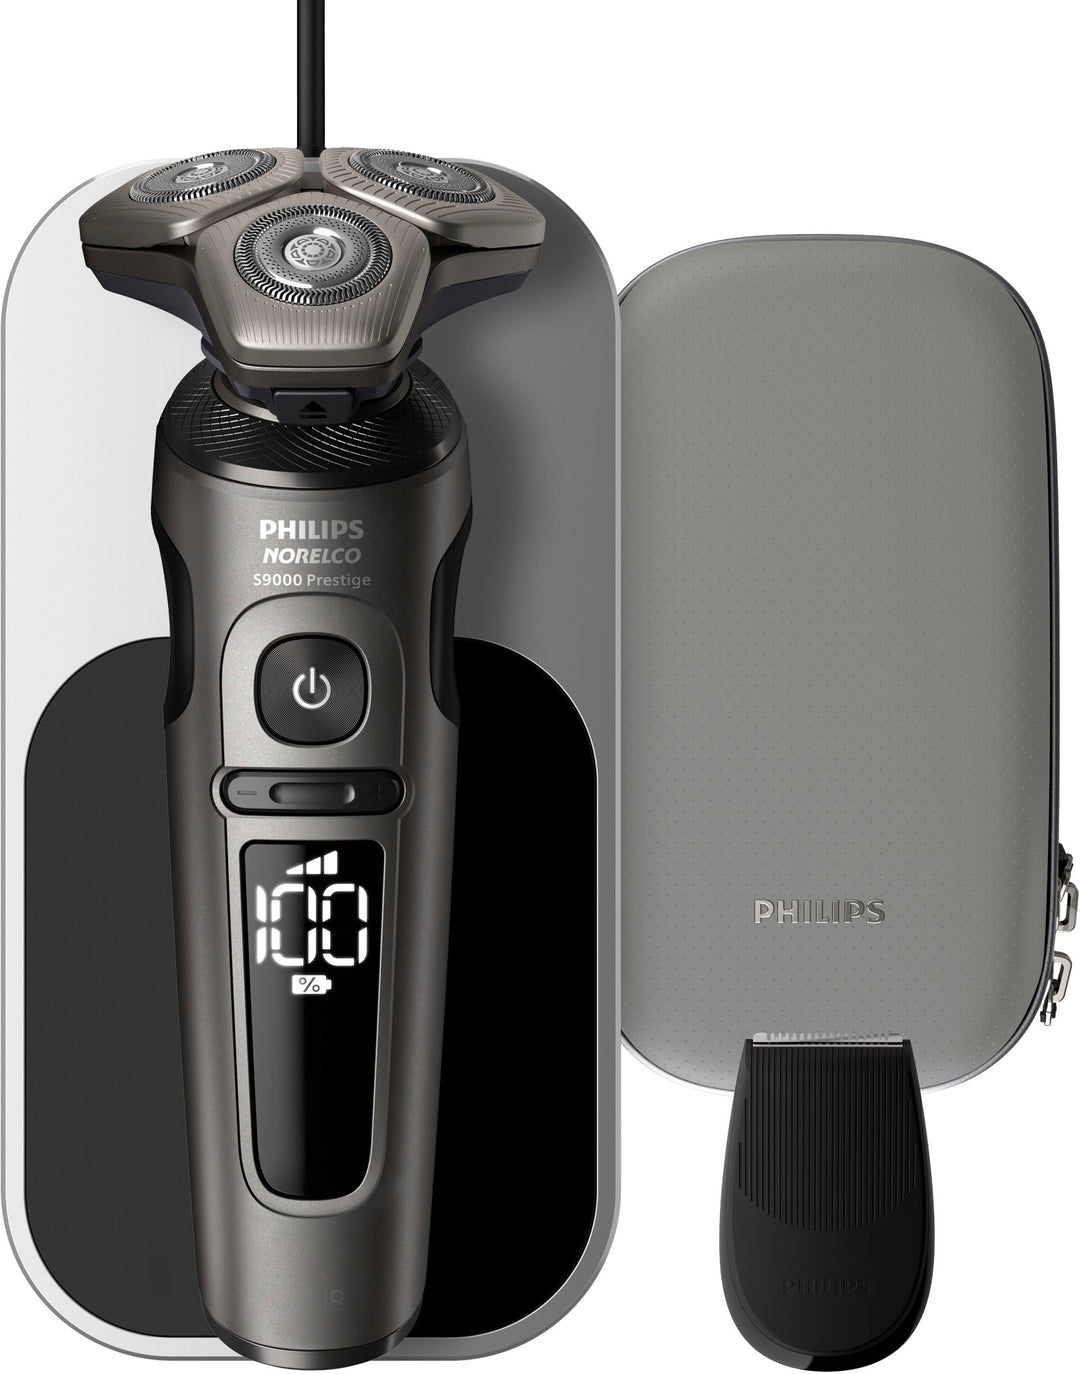 Philips Norelco - 9000 Prestige Shaver with Qi Charging Pad SP9872/86 - Black_1